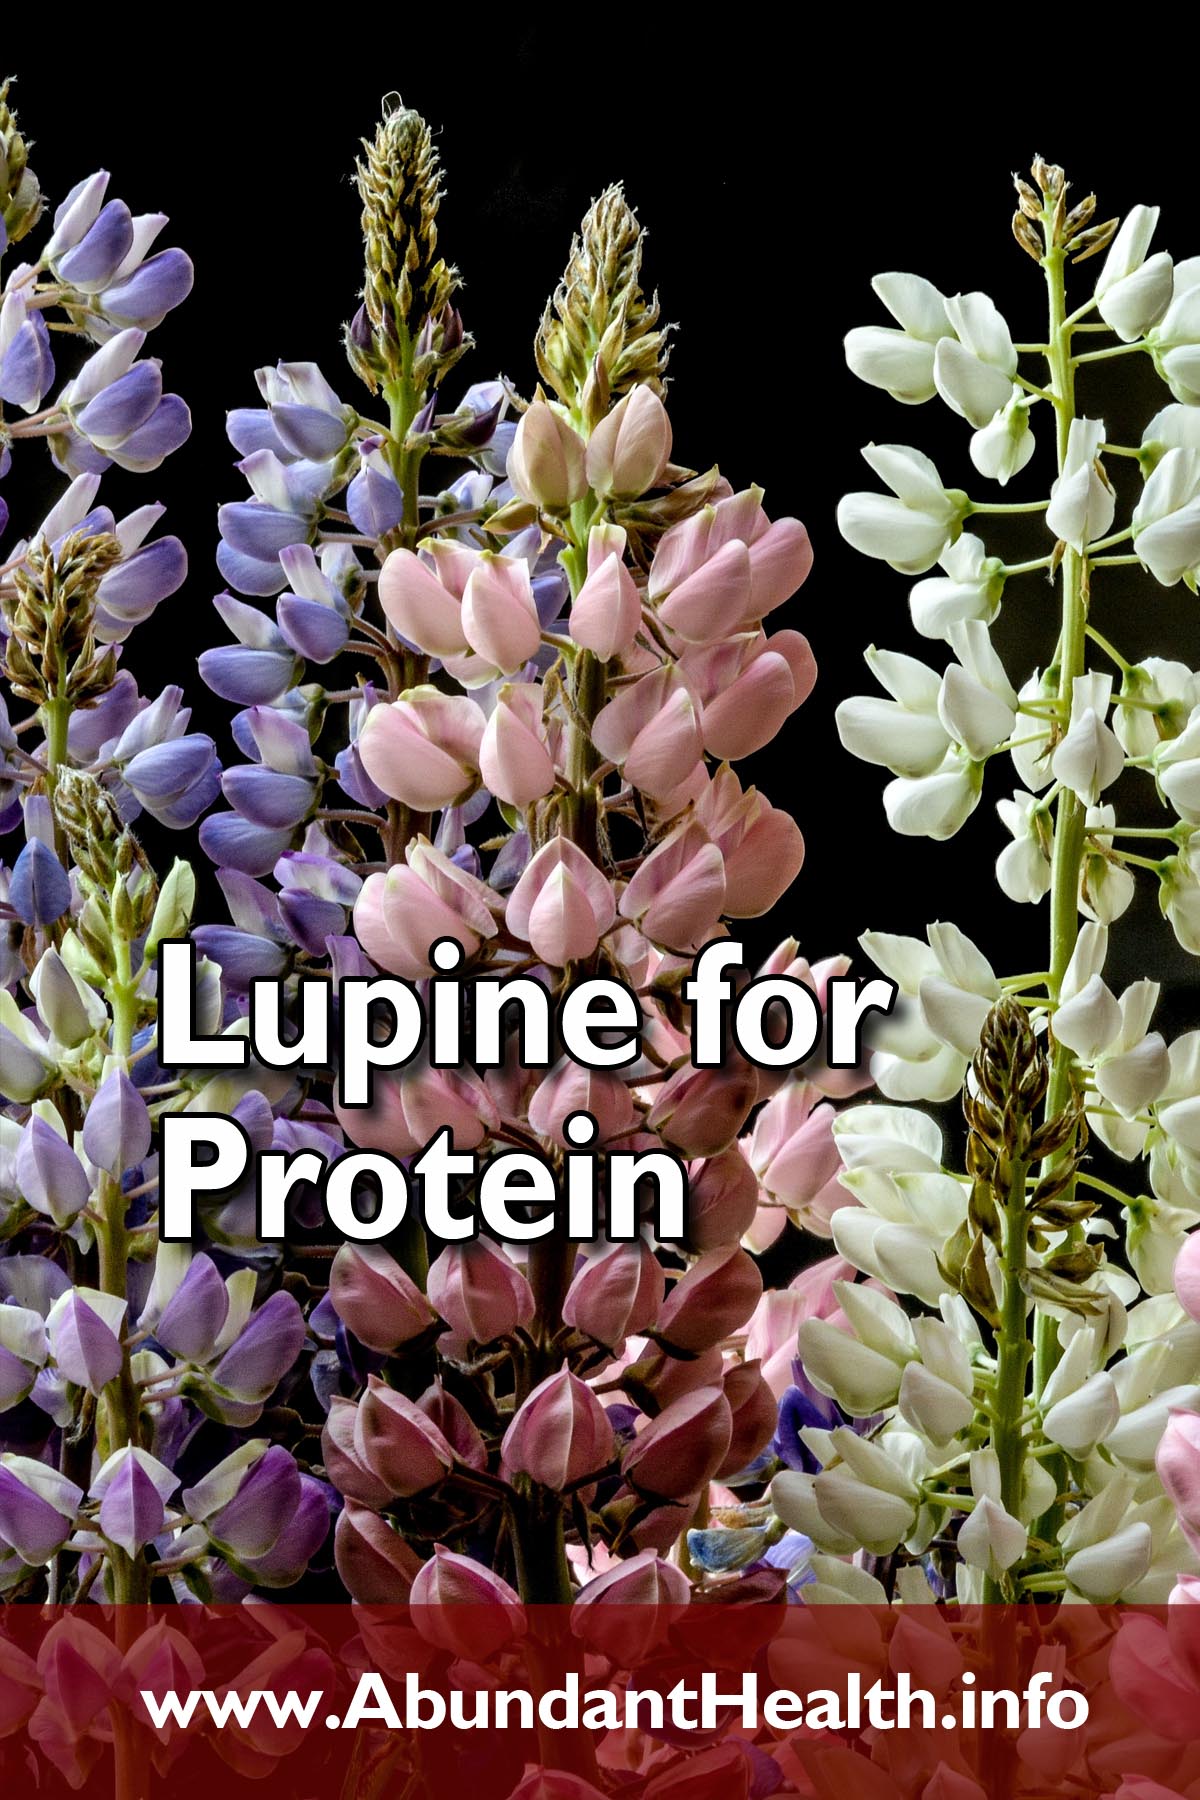 Lupine for Protein